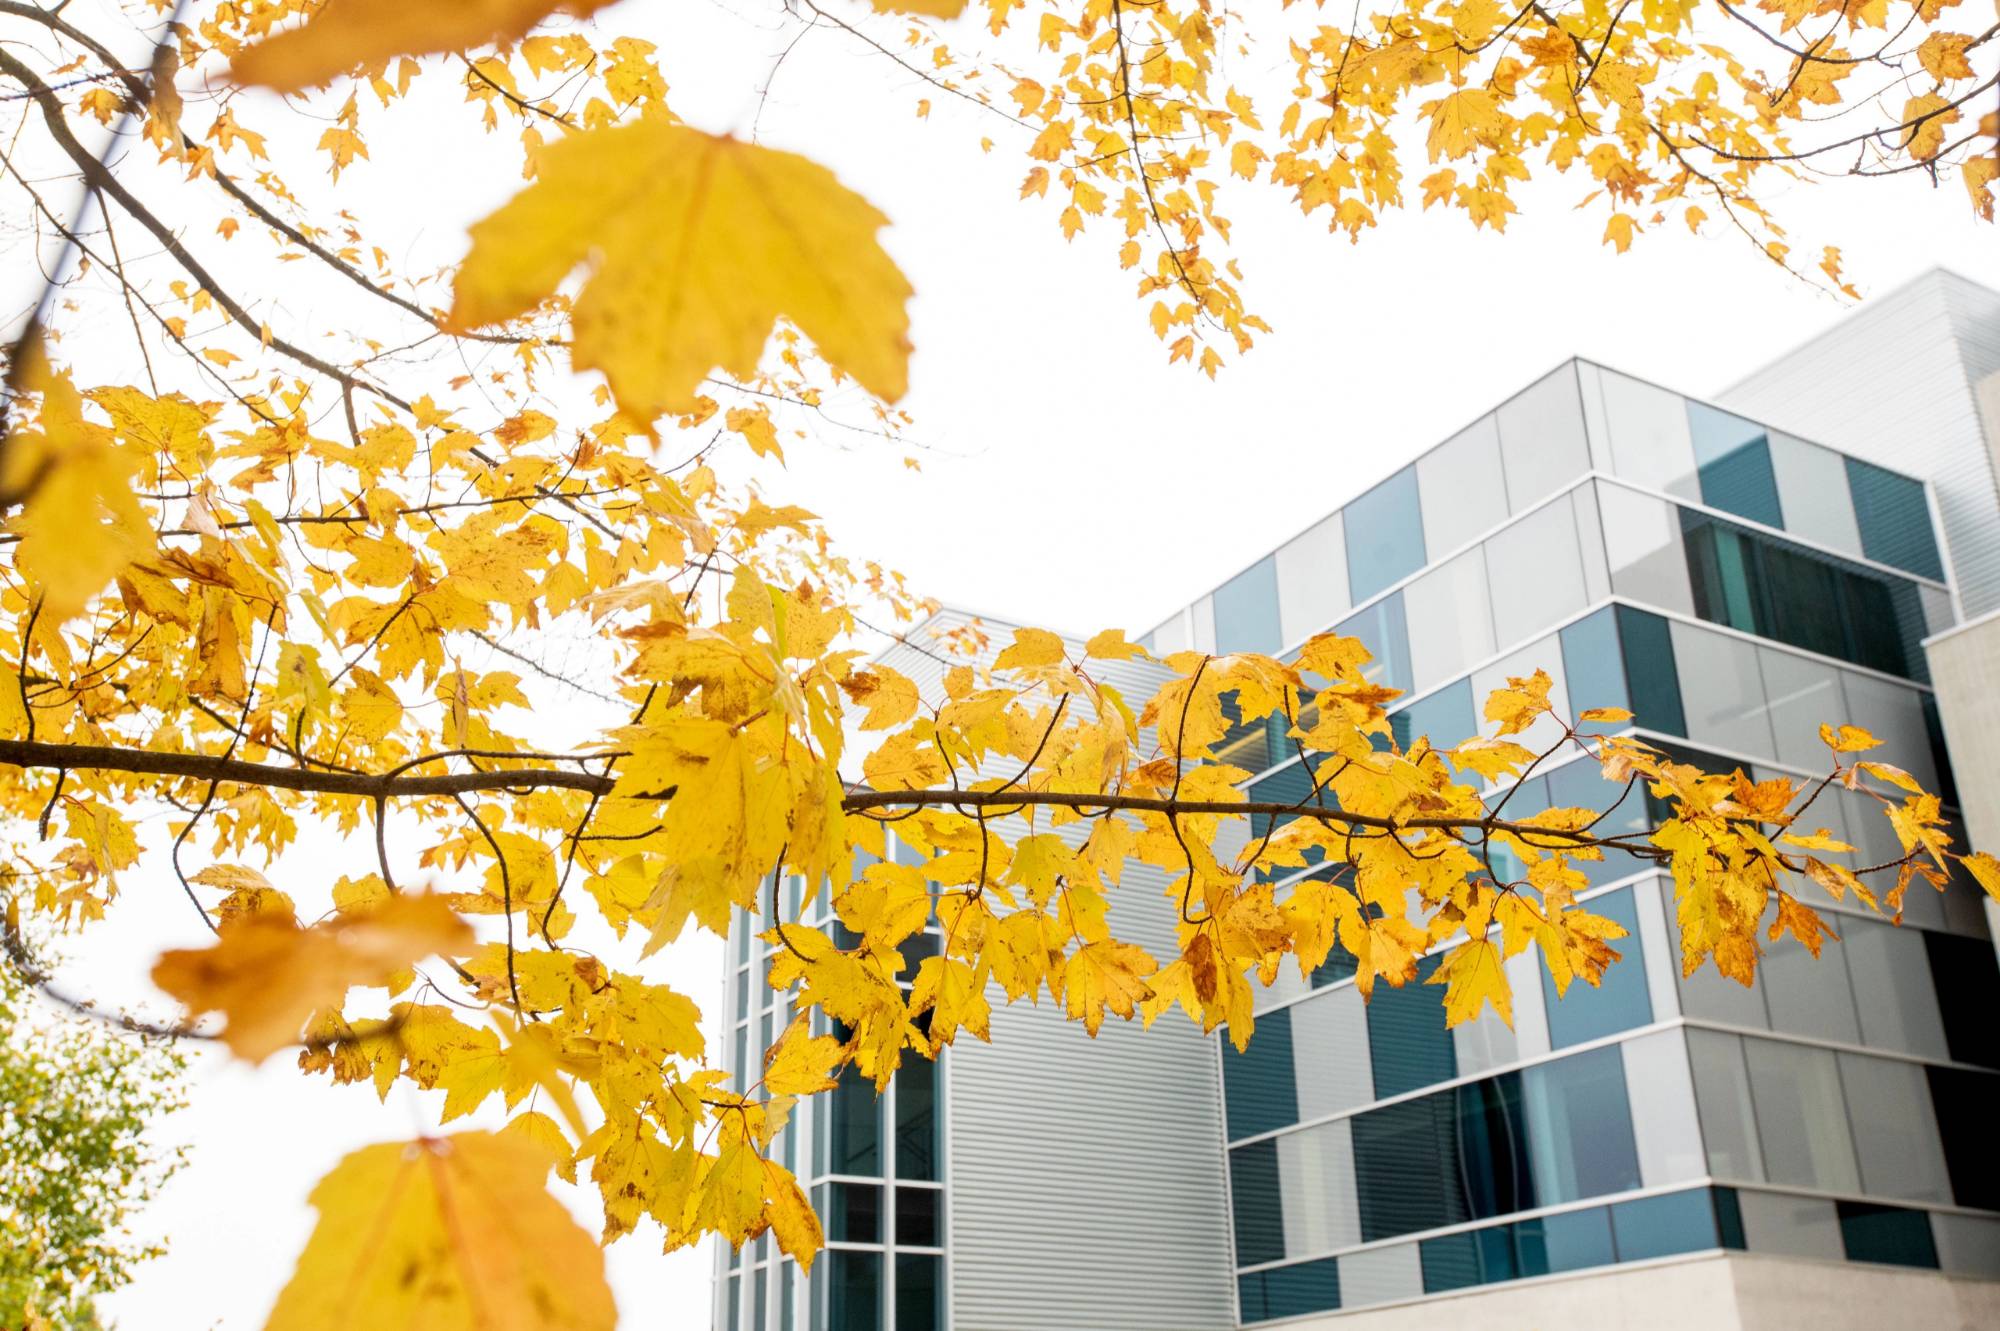 Zumberg Hall surrounded by yellow fall leaves